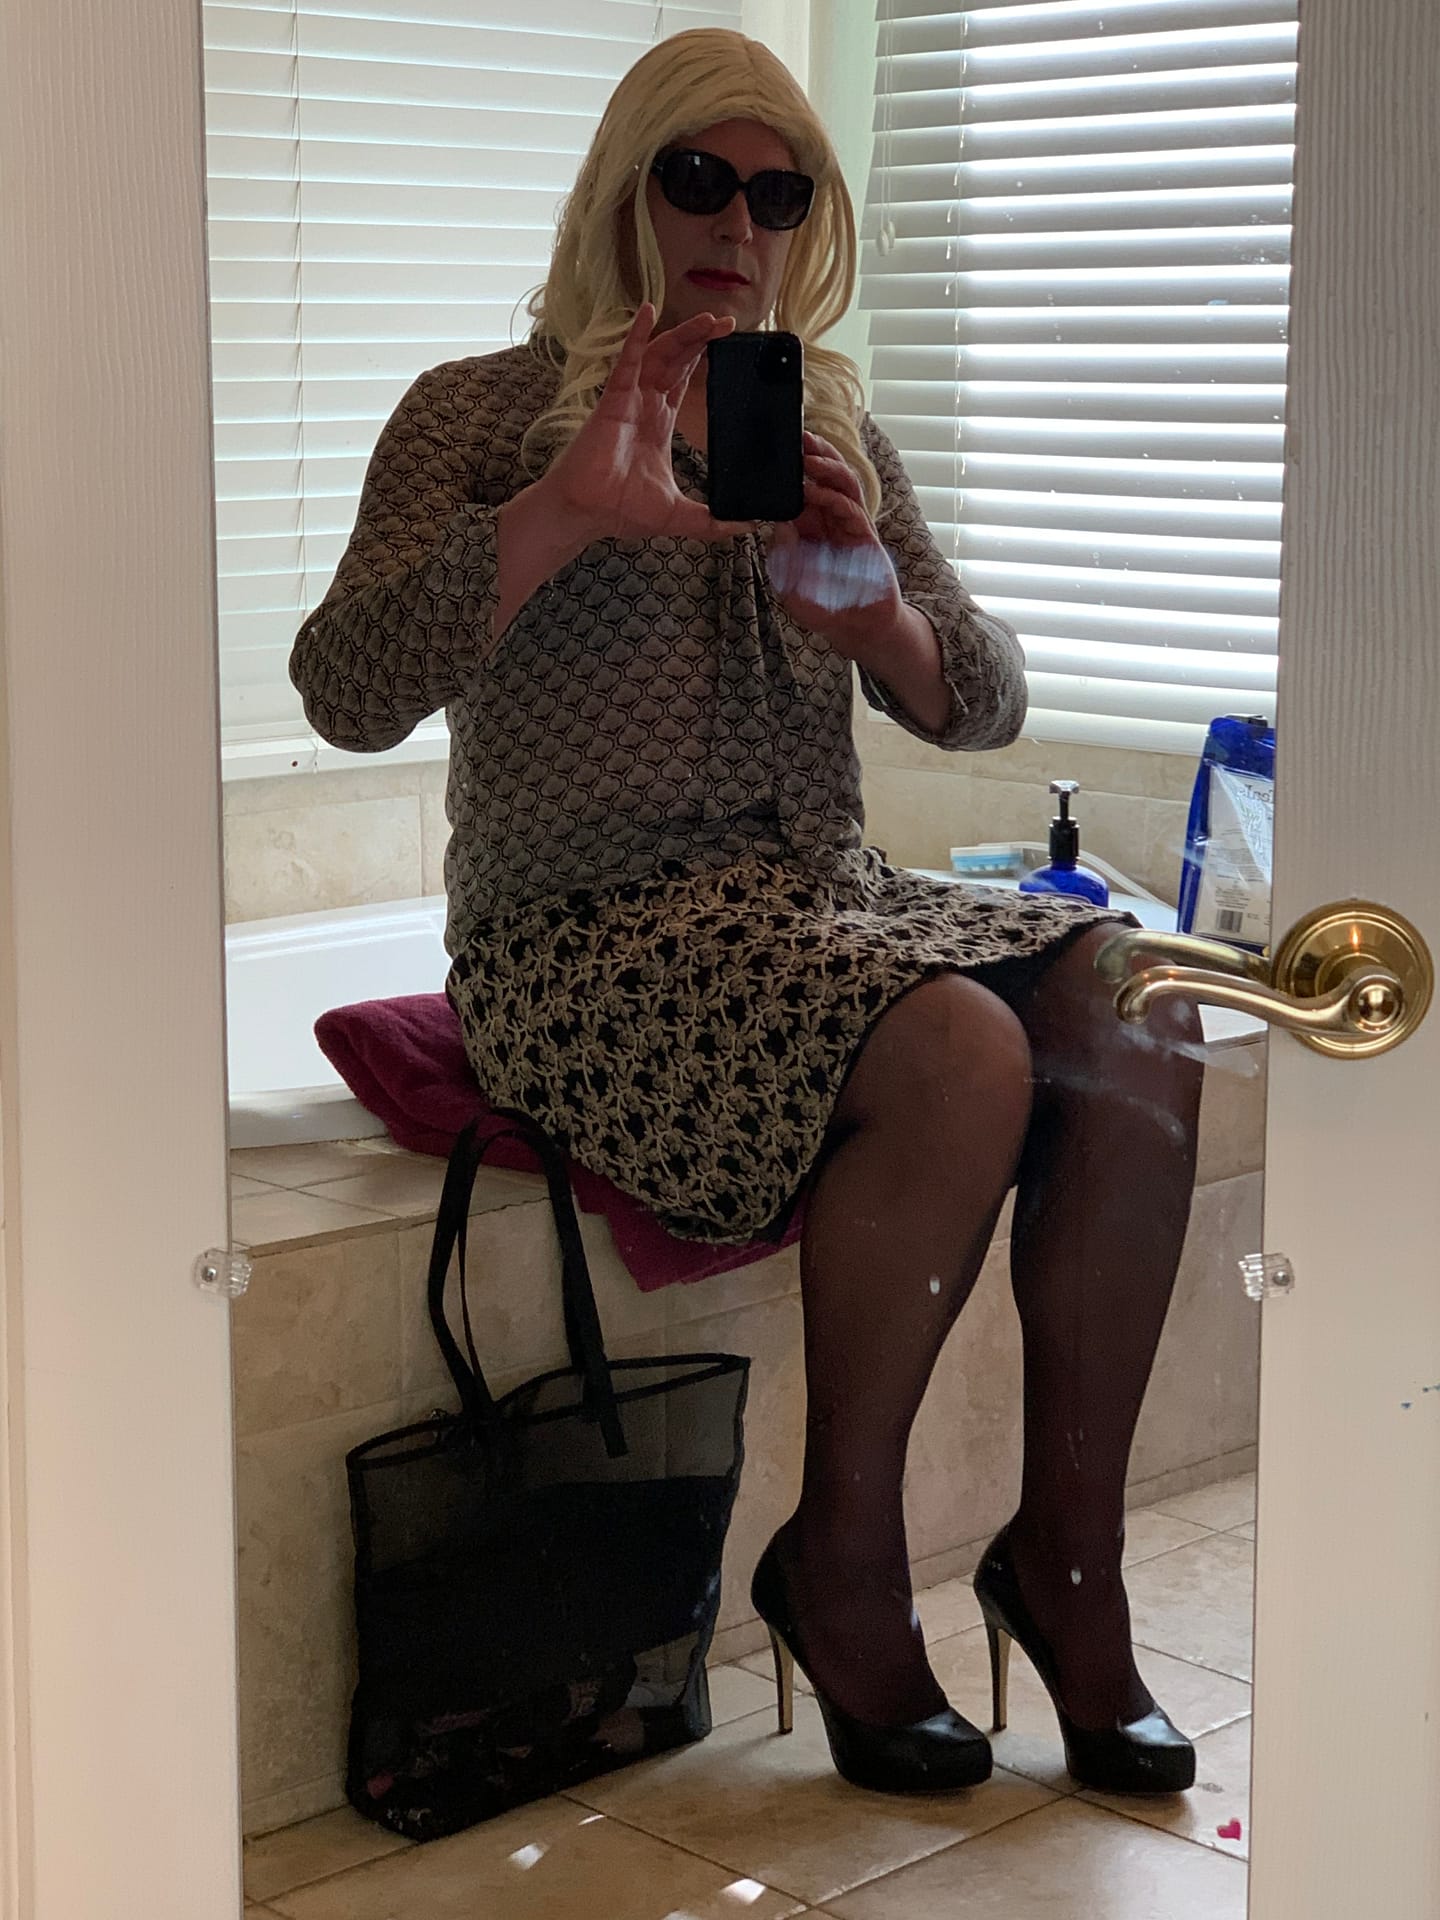 Another look at the WFH outfit – Crossdresser Heaven